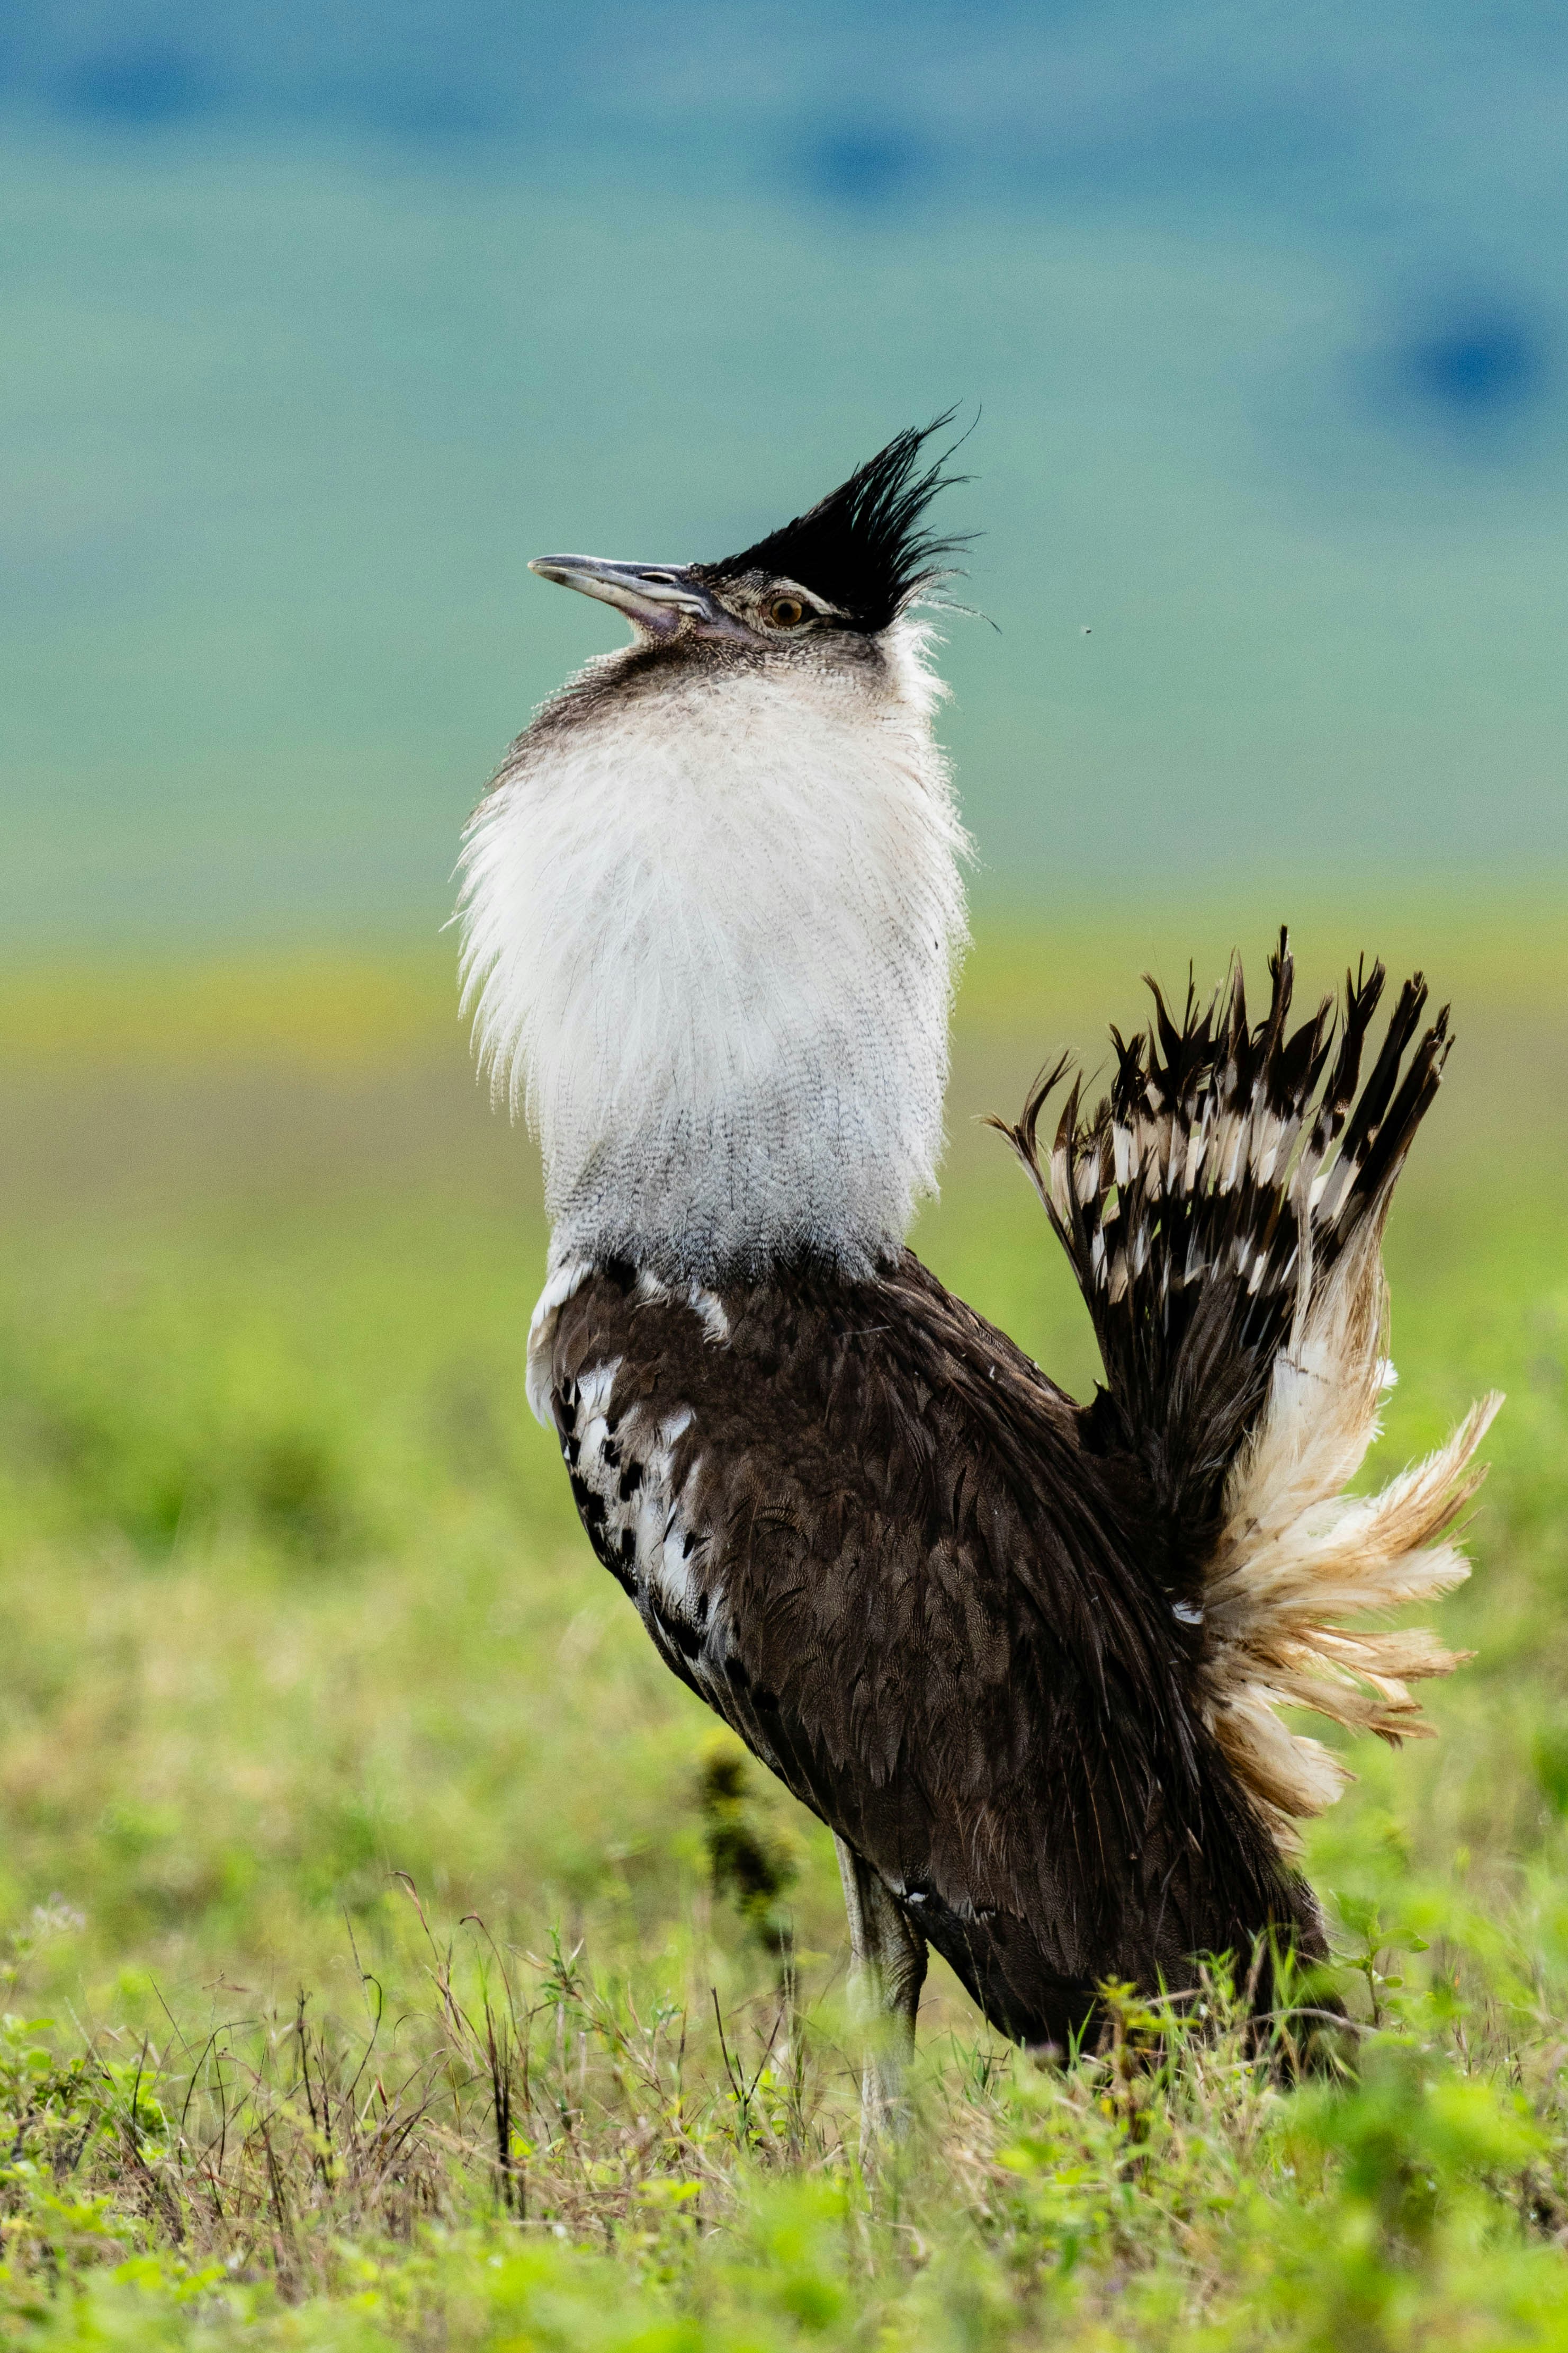 great photo recipe,how to photograph kori bustard ready for the party.